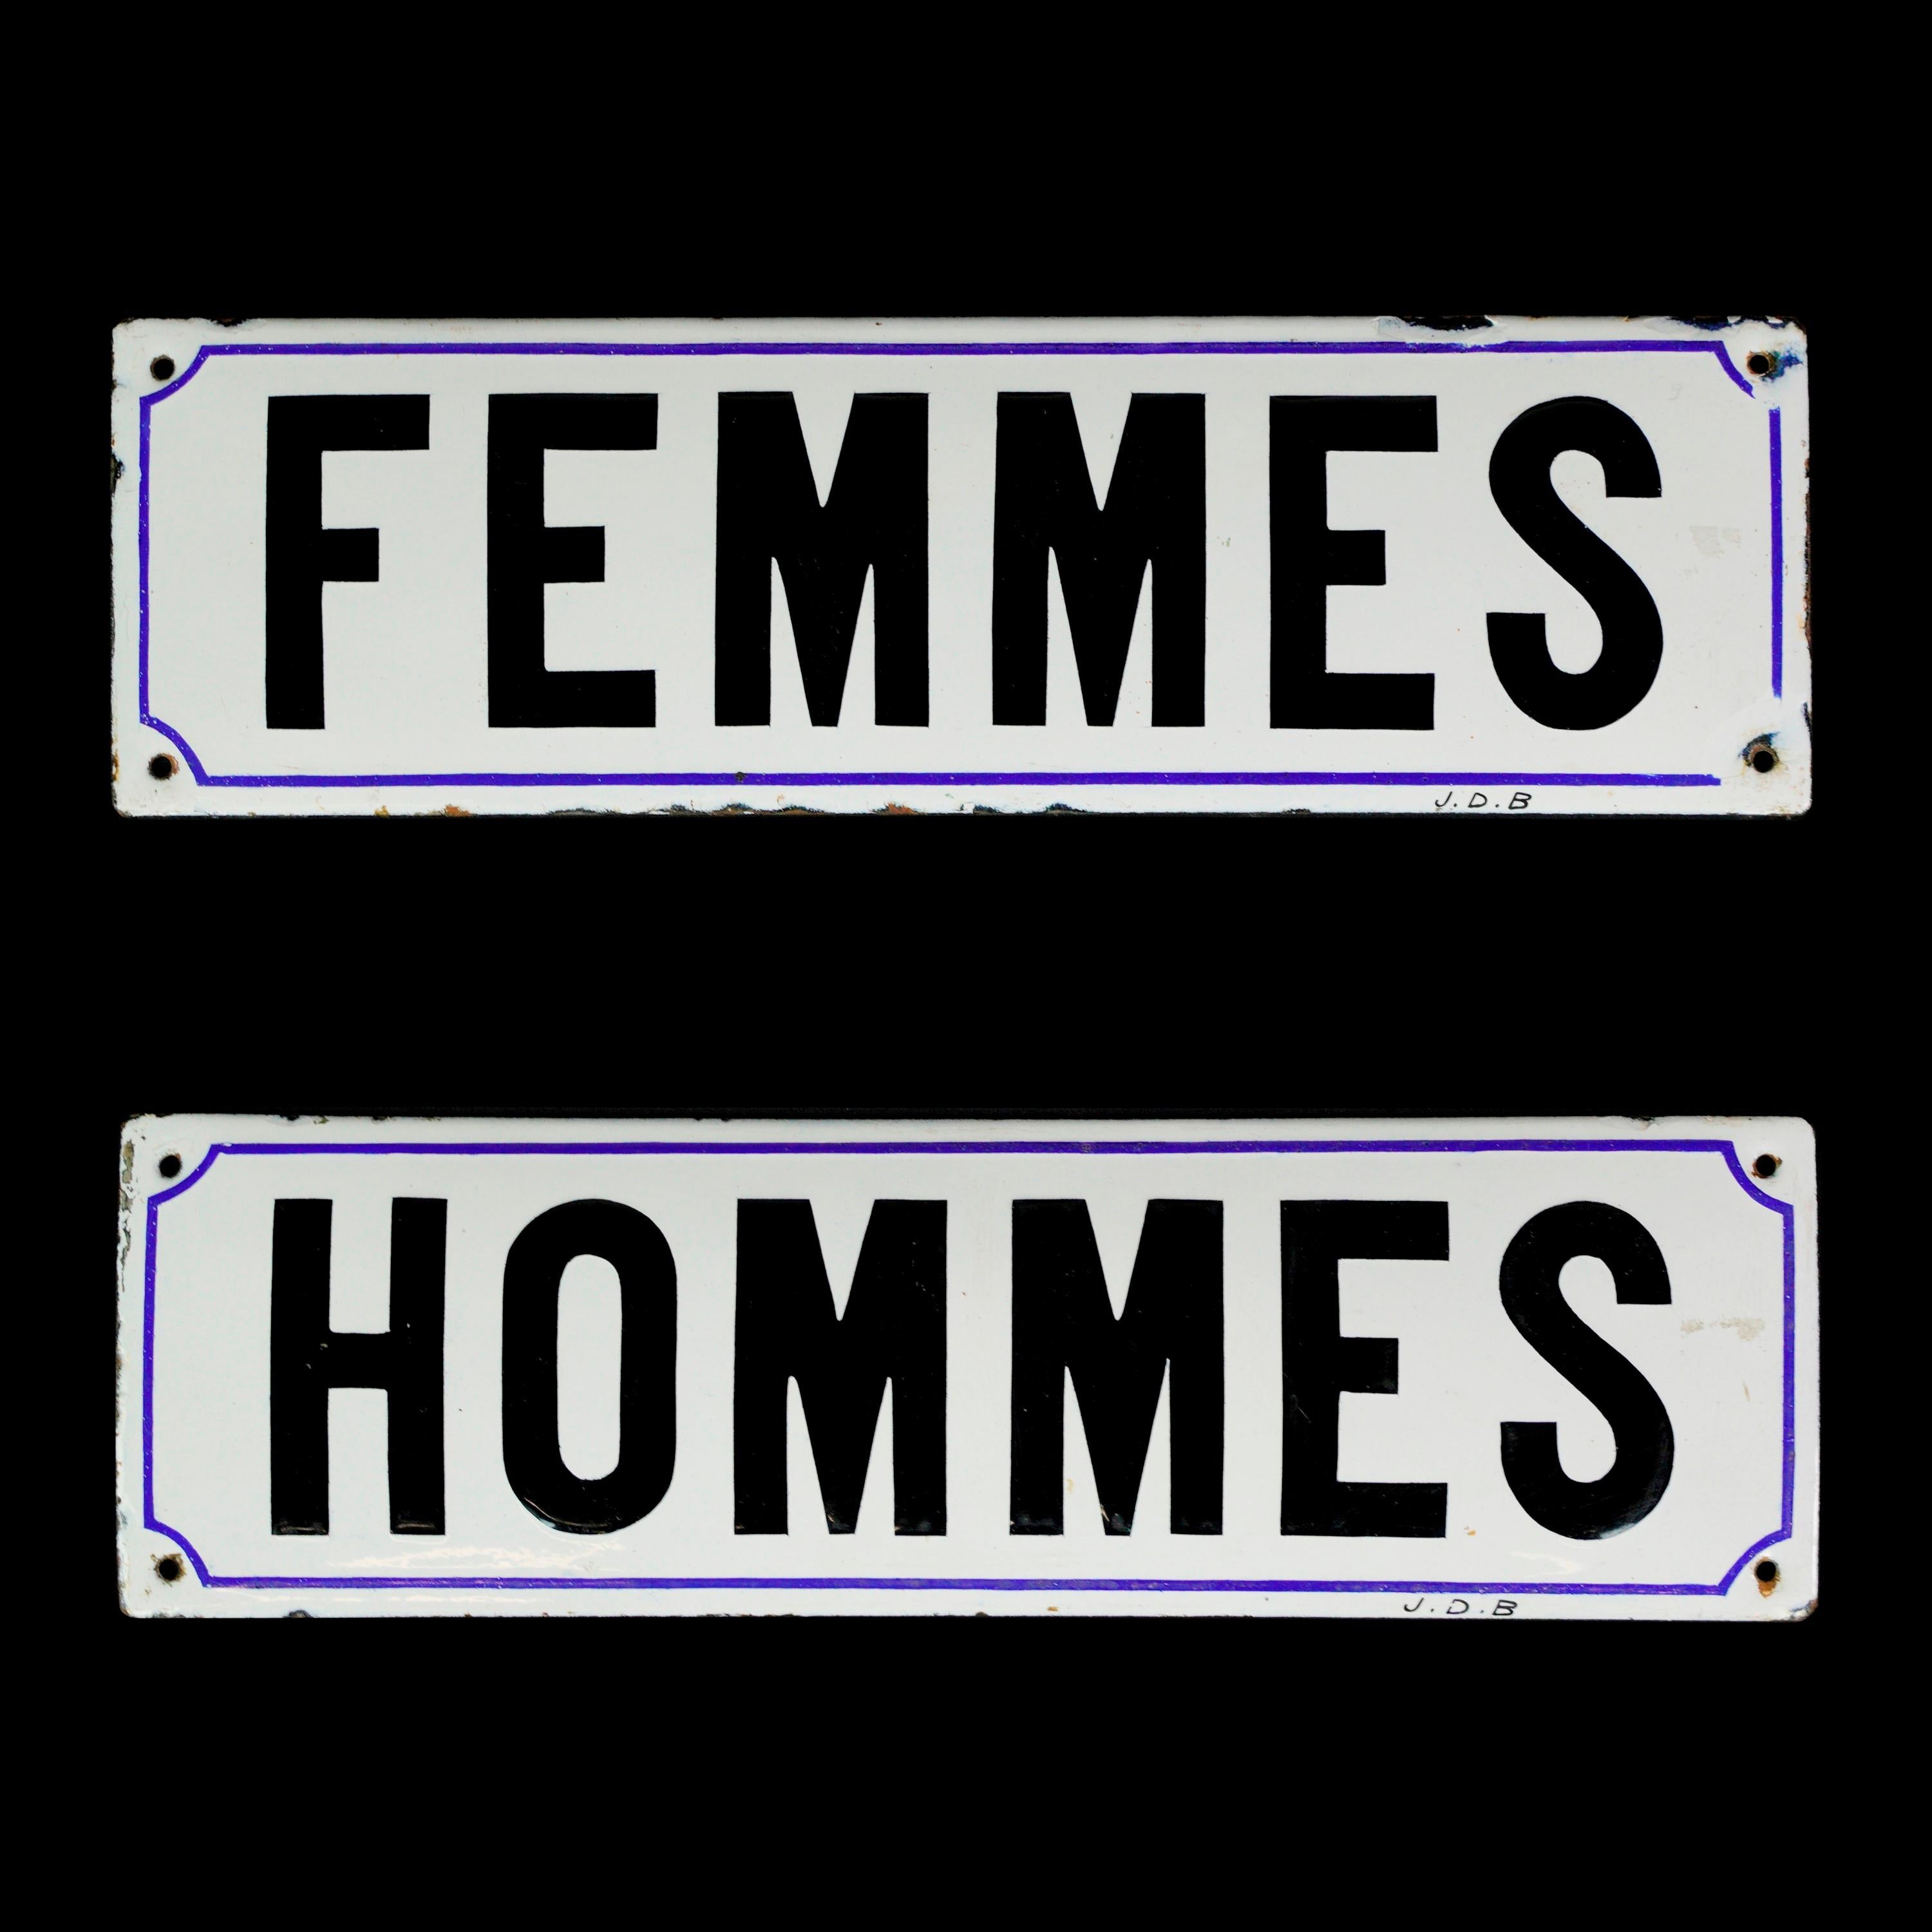 Enameled steel white signs with black lettering in French for men and women outlined in blue. Good condition with appropriate wear from age. Stamped J.D.B. Priced as a pair. Please note, this item is located in one of our NYC locations.